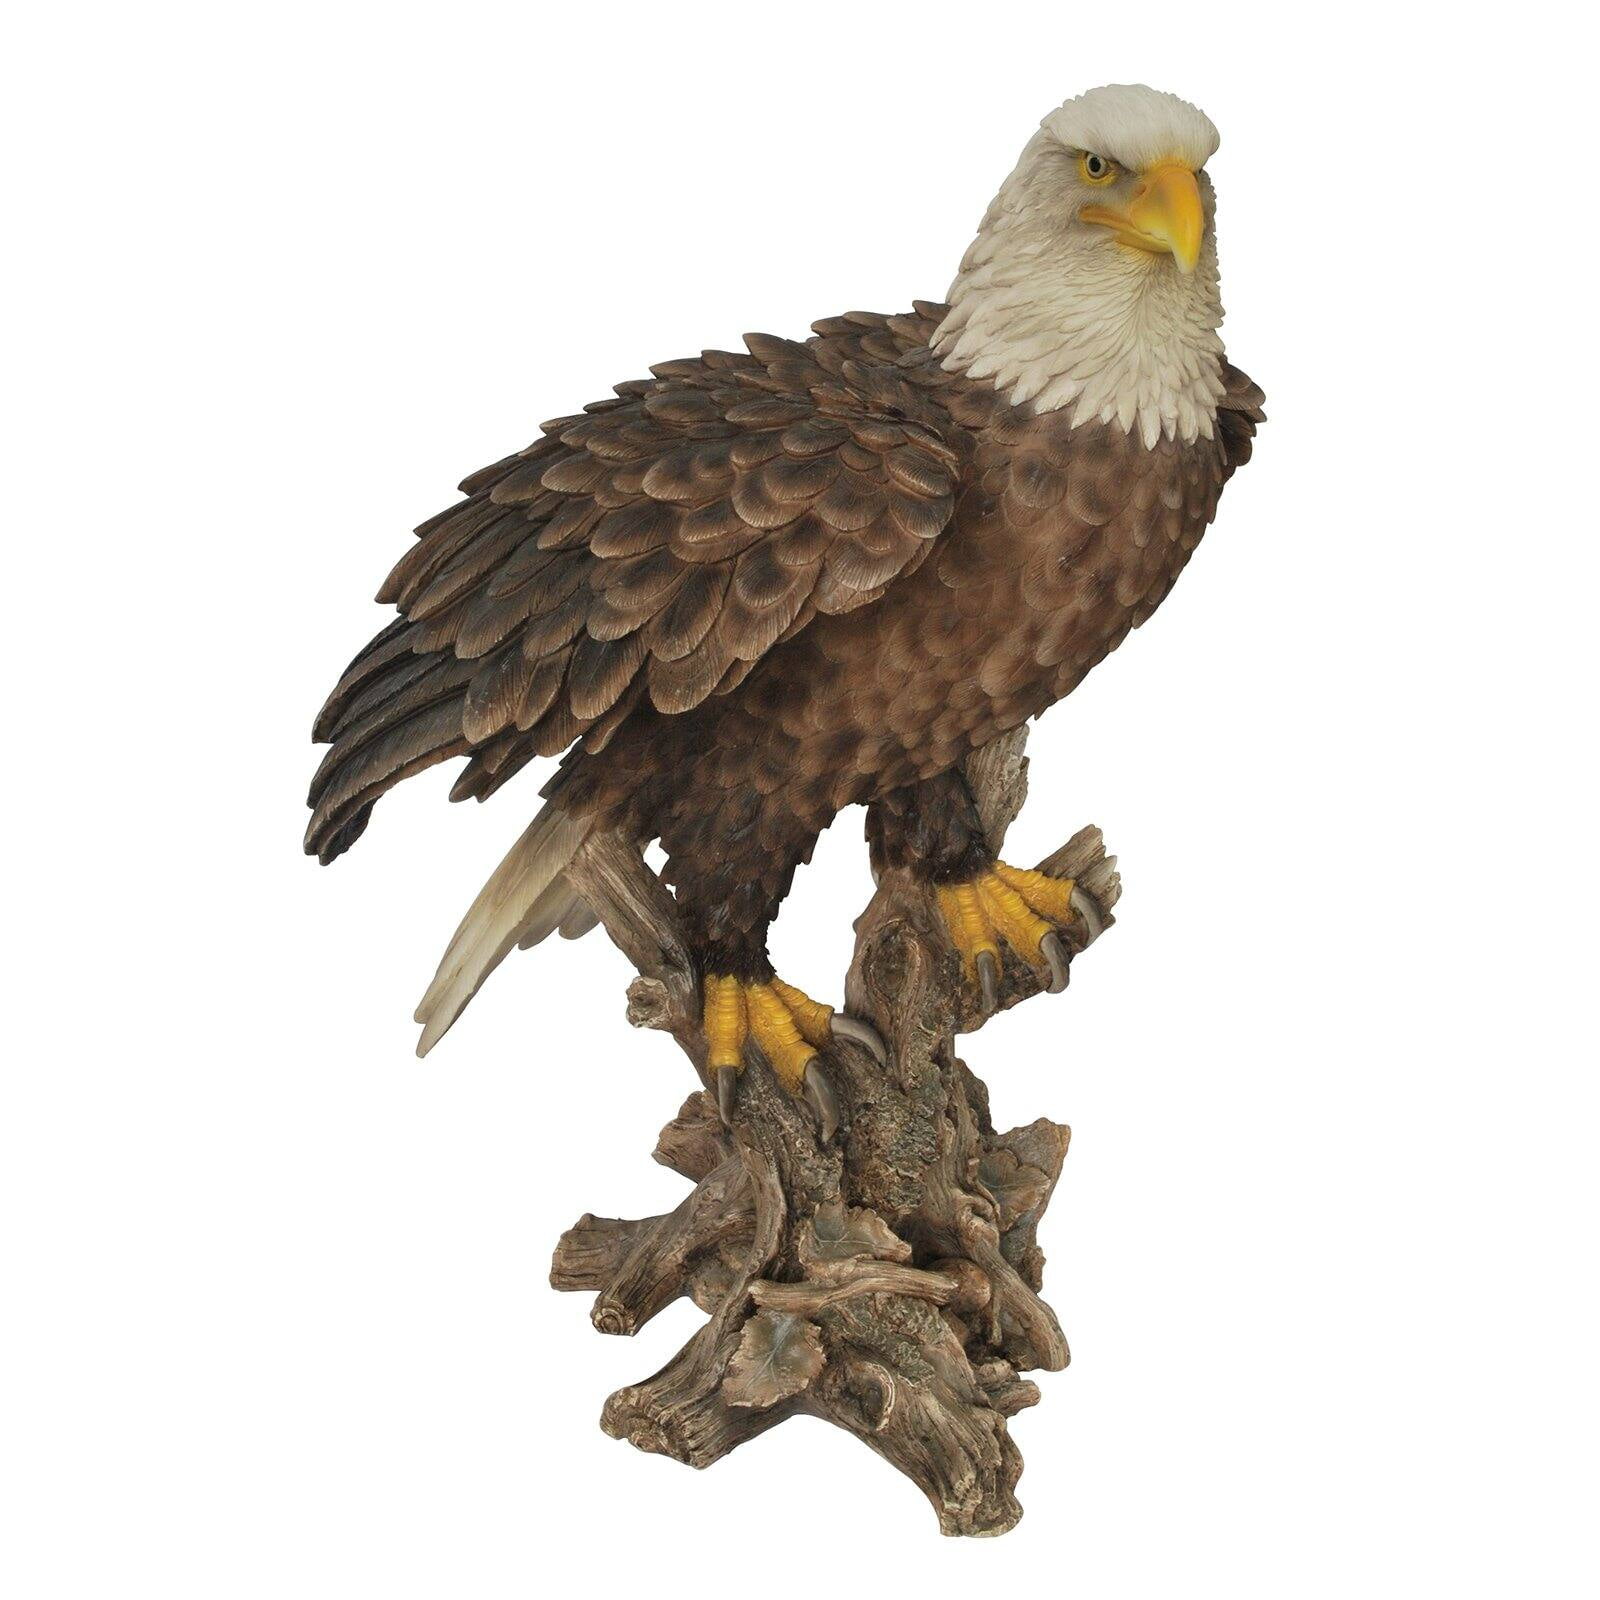 12 StealStreet SS-G-54153 Bald Eagle Head & Bust Statue with Feather on Wood Base